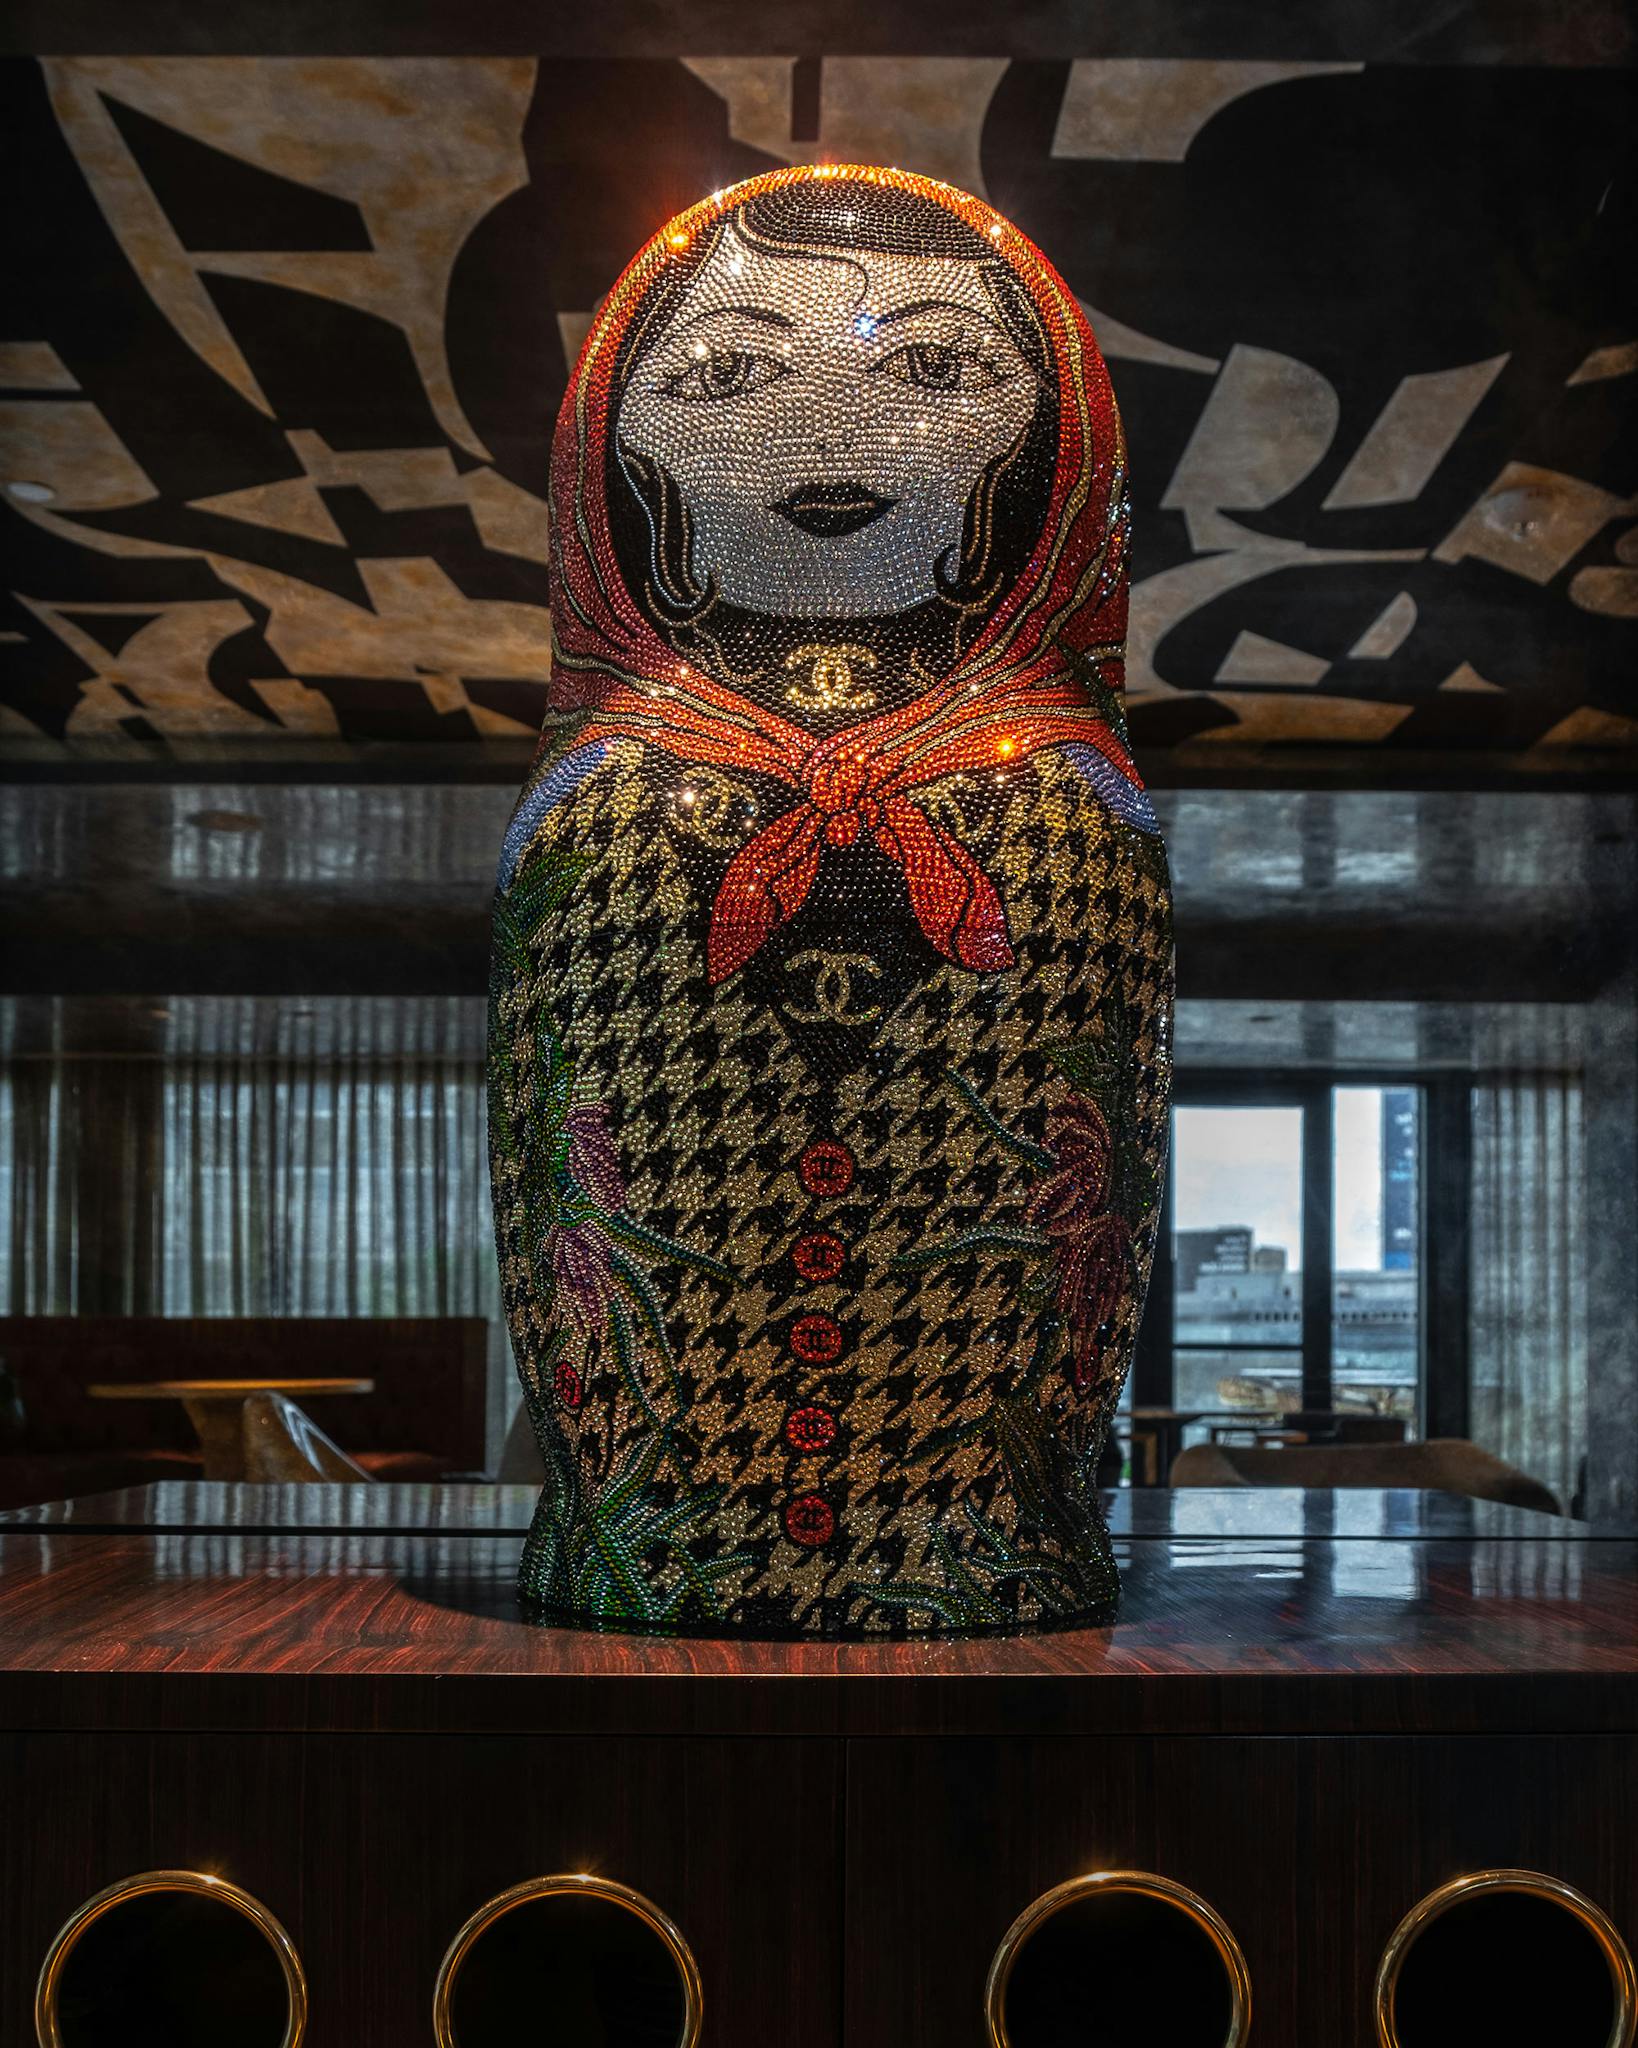 Nesting Doll ornament in the Thompson Hotel.